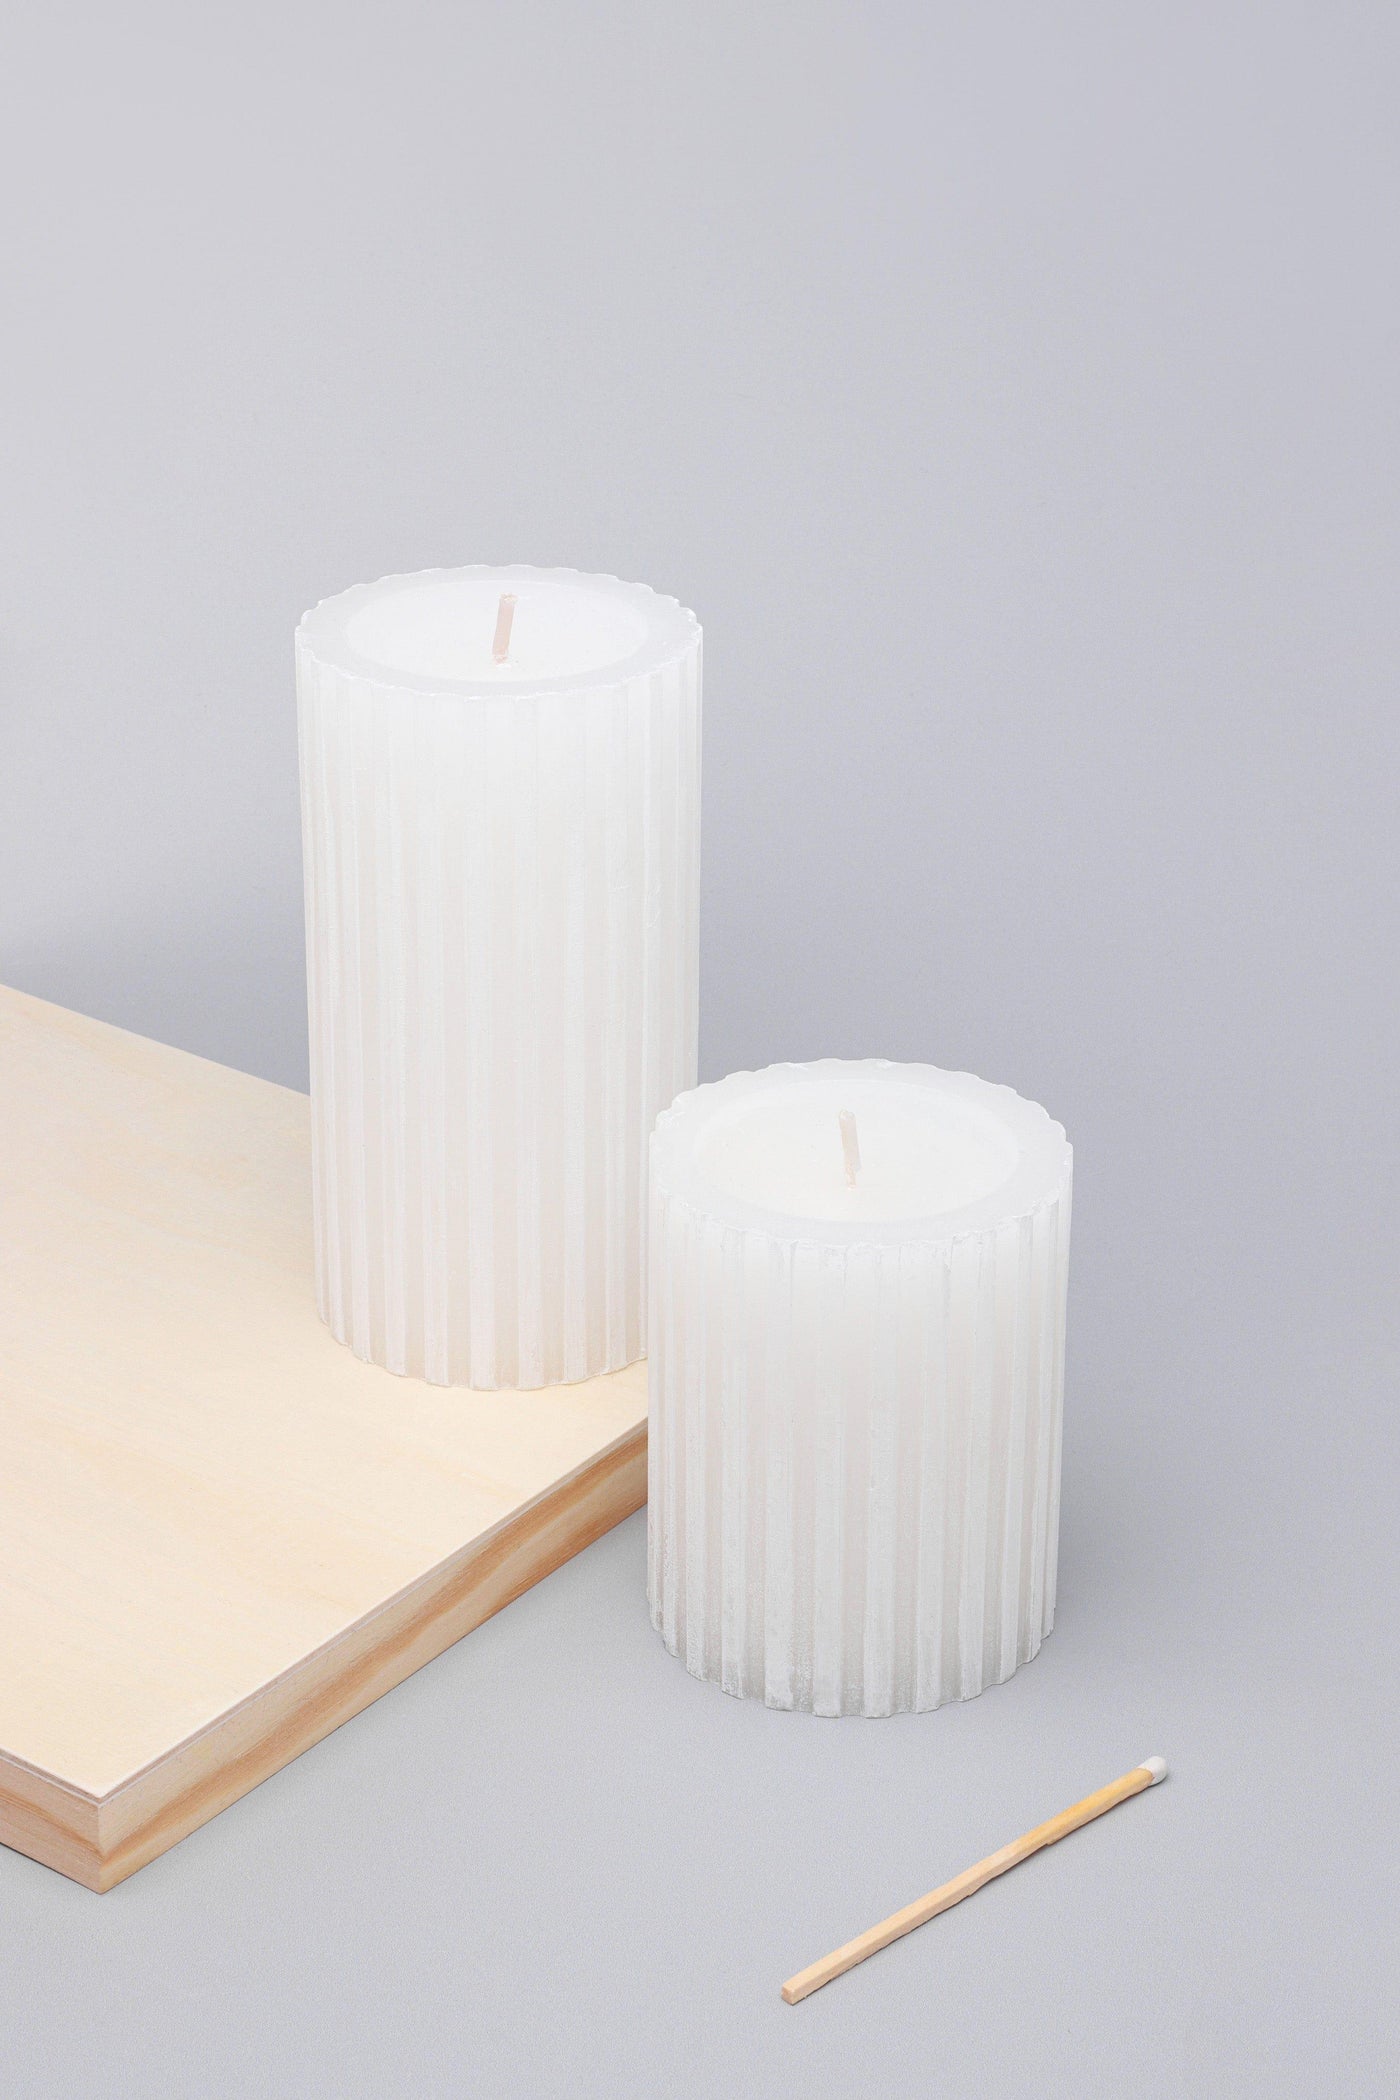 G Decor Candles White / Set Scented Grooved White Frangipani, Perfect for Meditation, Pillar Candle